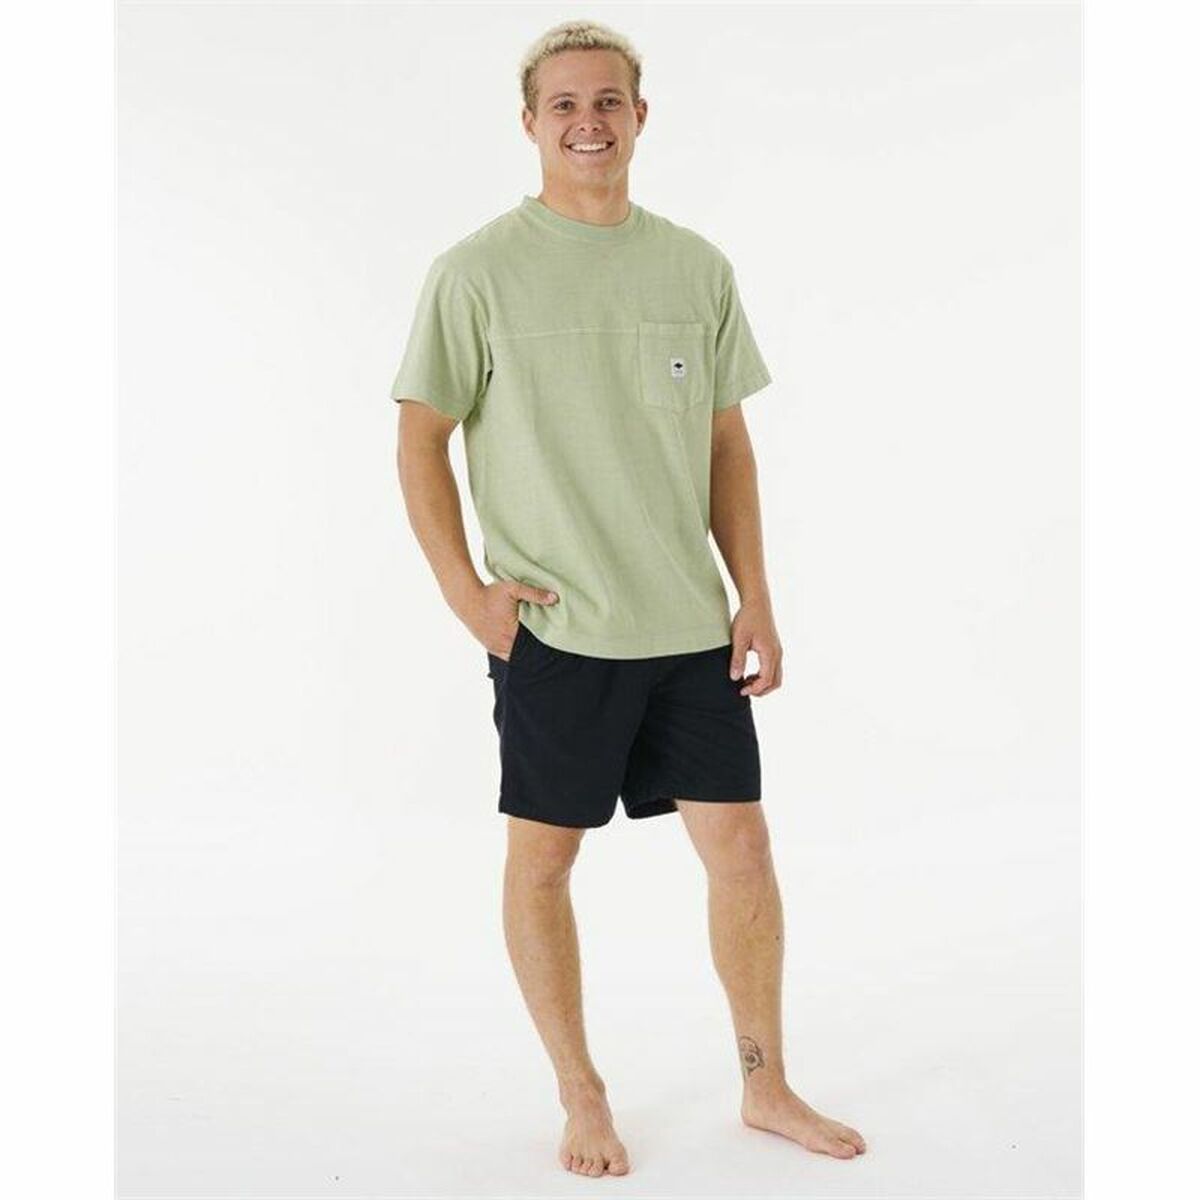 T-shirt Rip Curl Quality Surf Products Green Men